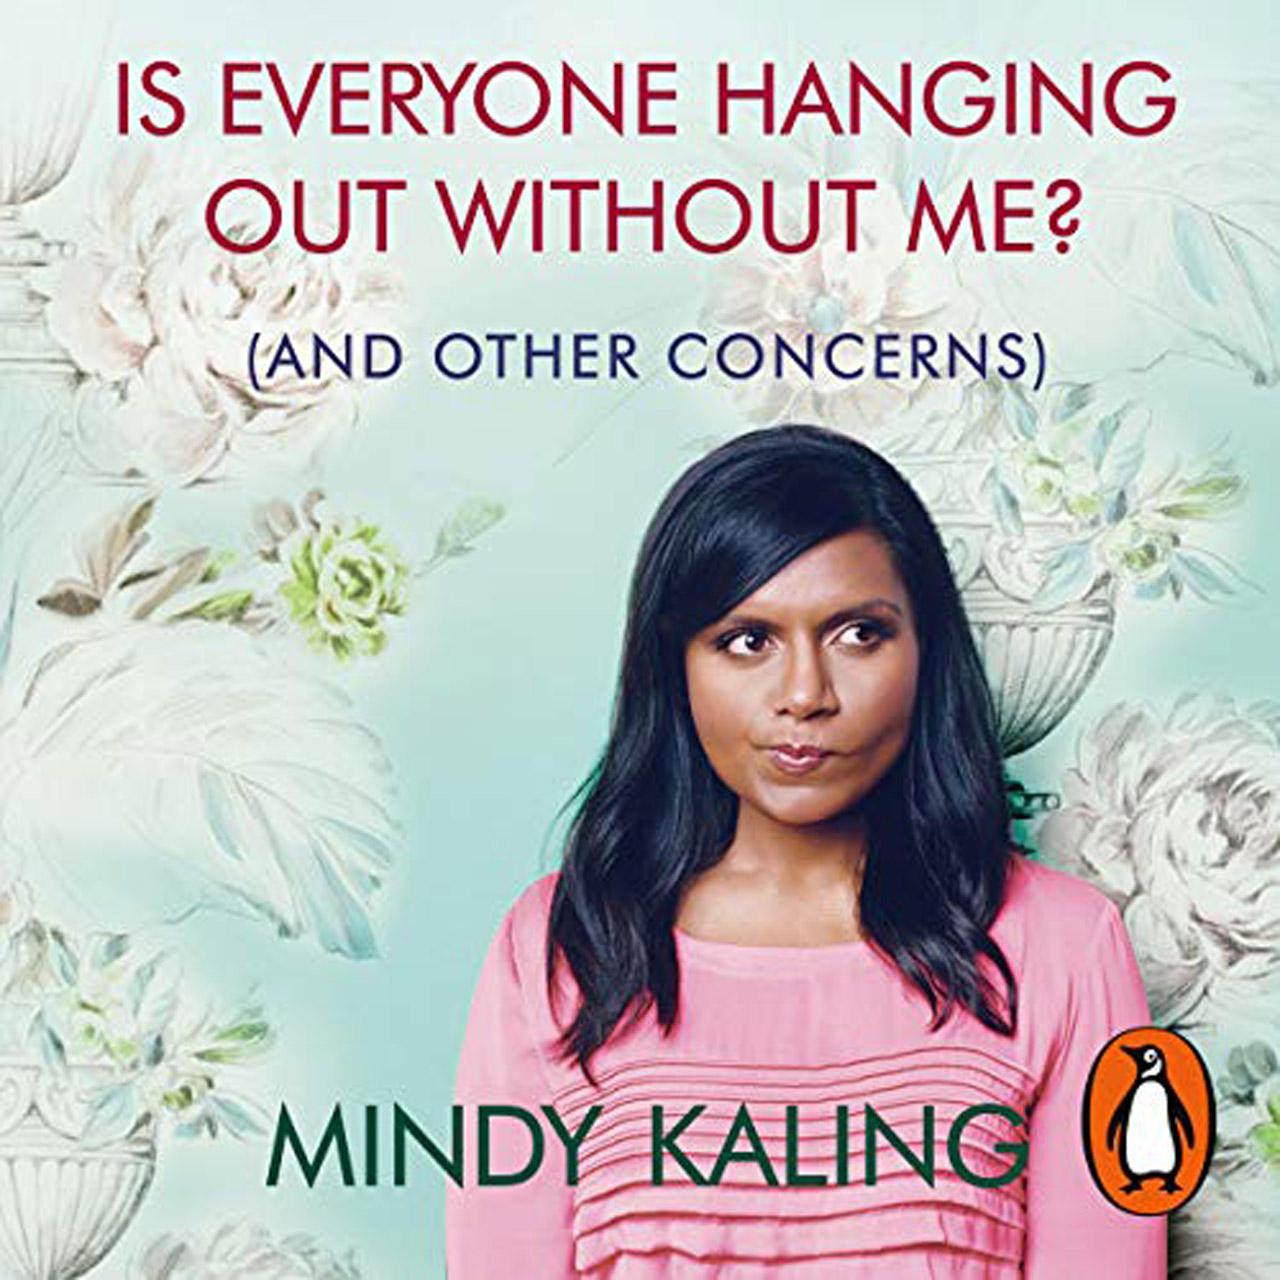 Mindy Kaling - Is Everyone Hanging Out Without Me?
Mindy Kaling has lived many lives: comedienne, actress, obedient child of immigrant professionals, and now, writer. With a blend of witty confessions and unscientific observations, her memoir ‘Is Everyone Hanging Out Without Me?’, talks about everything from being a timid young chubster afraid of her own bike to living the Hollywood life, dating, friendships, and planning her own funeral - all executed with several conveniently placed stopping points for you to run errands and make those important phone calls.